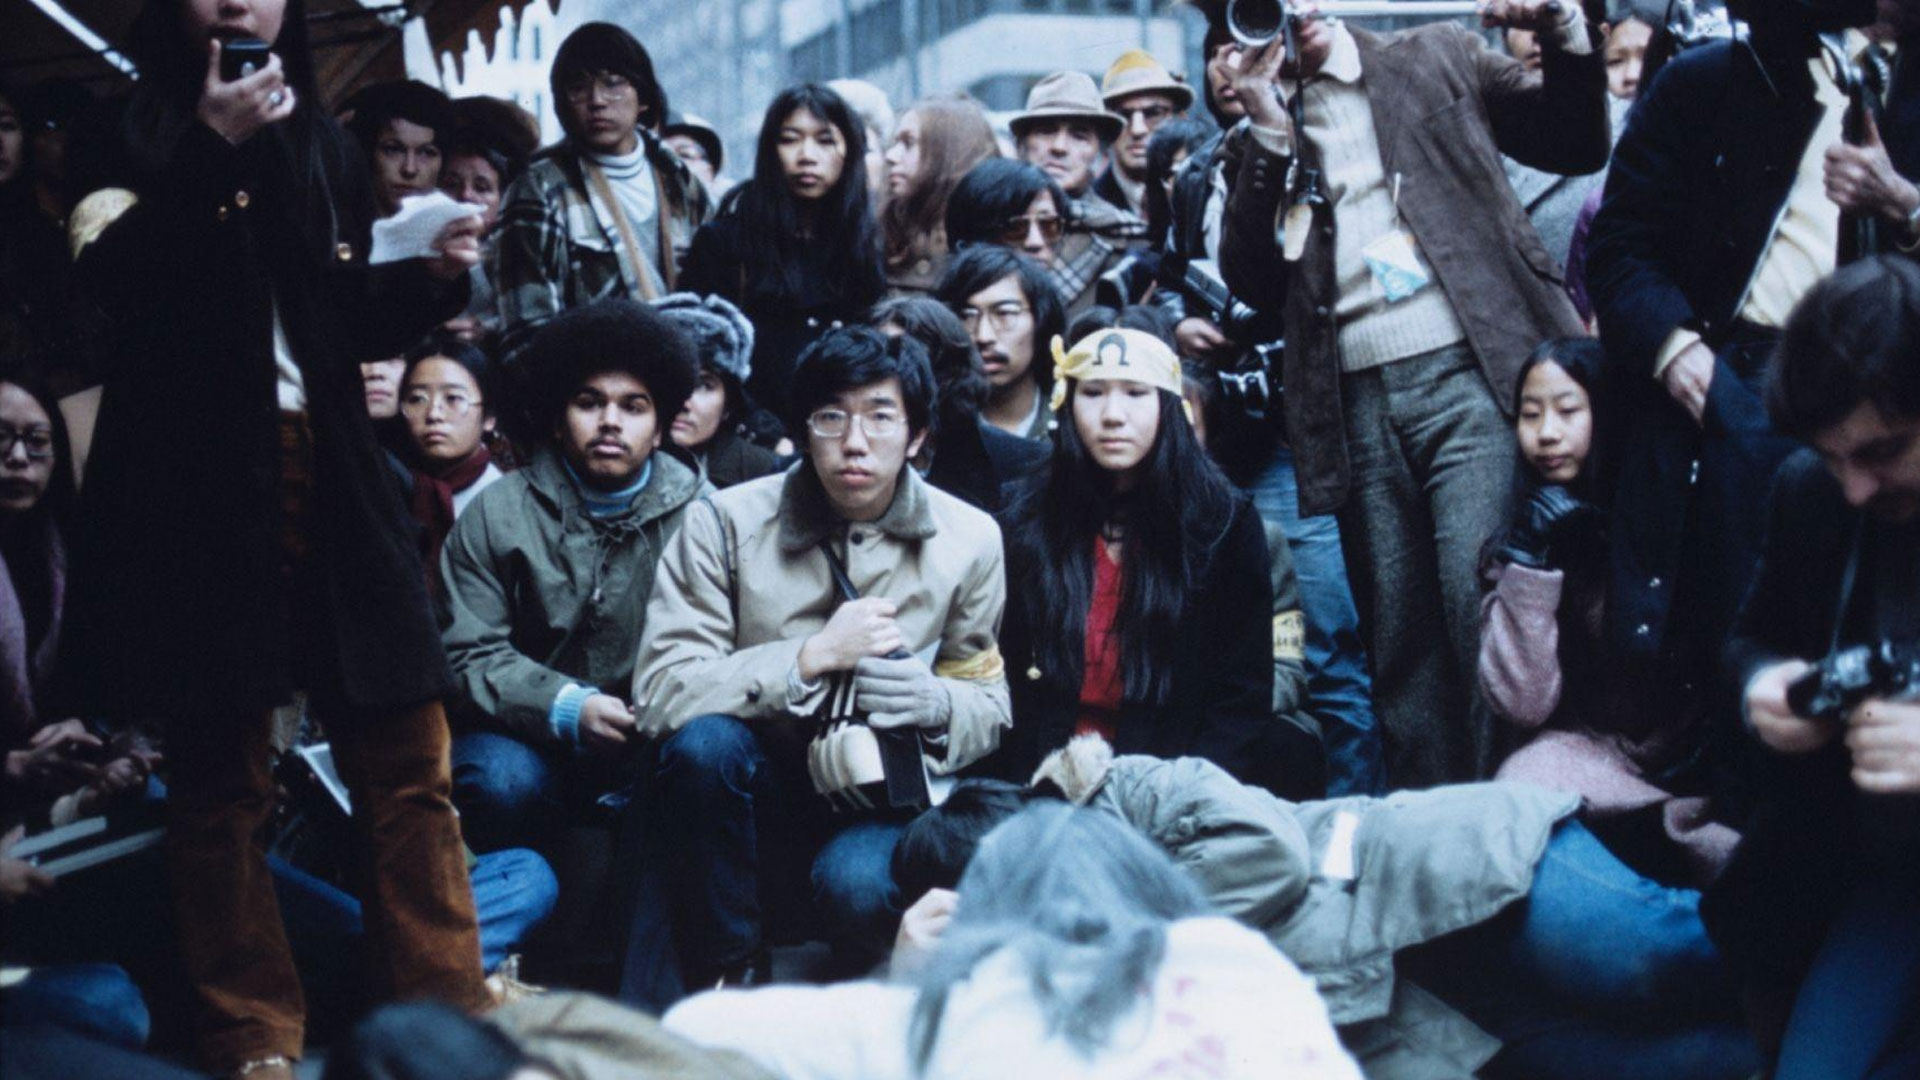 Corky Lee’s rare images of the Asian American Movement on the East Coast in the 1970s.